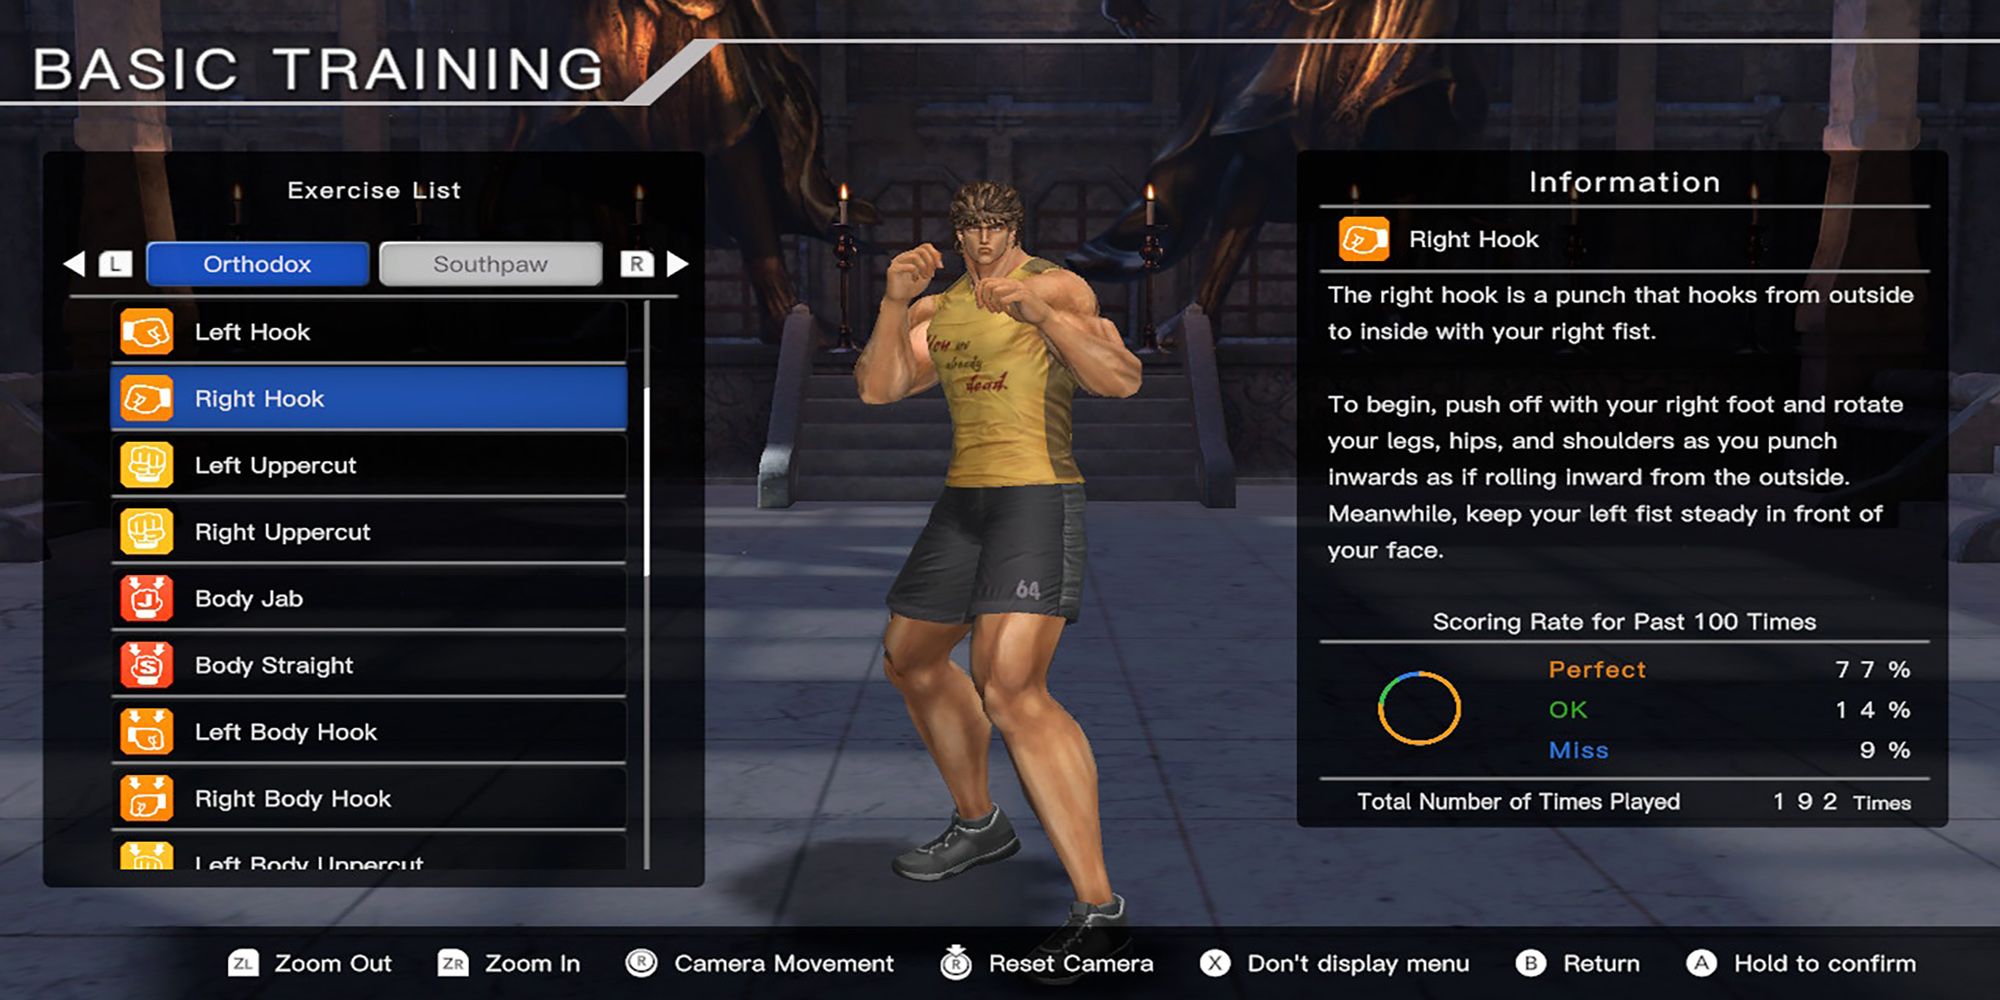 Kenshiro stands next to a list of boxing moves you can practice in Fitness Boxing: Fist Of The North Star's Basic Training mode.